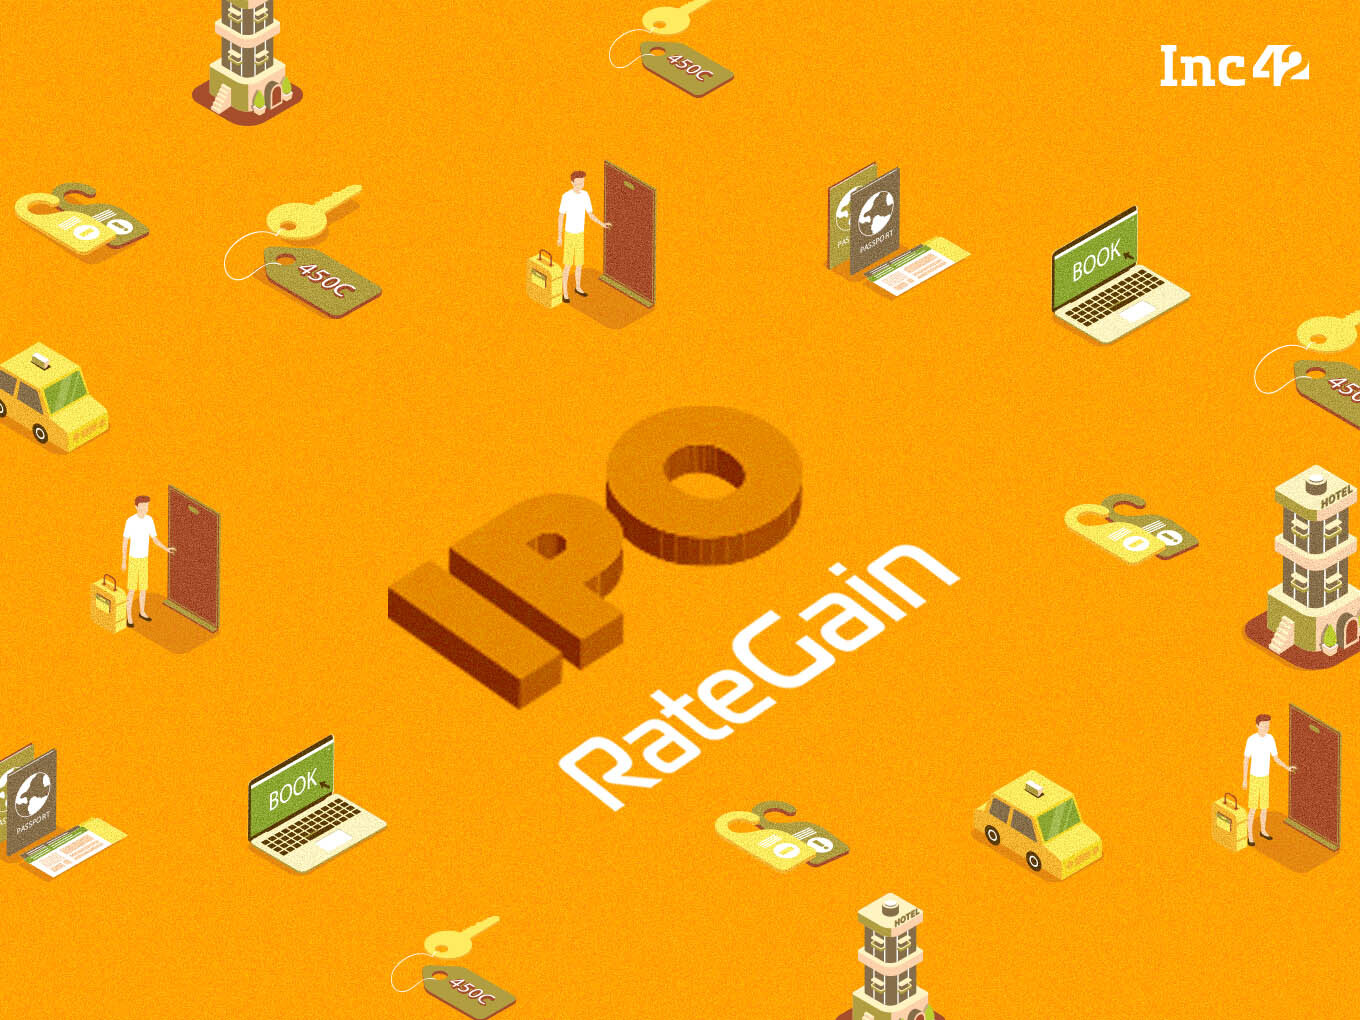 RateGain Shares Command A Premium Of INR 60 In Grey Market